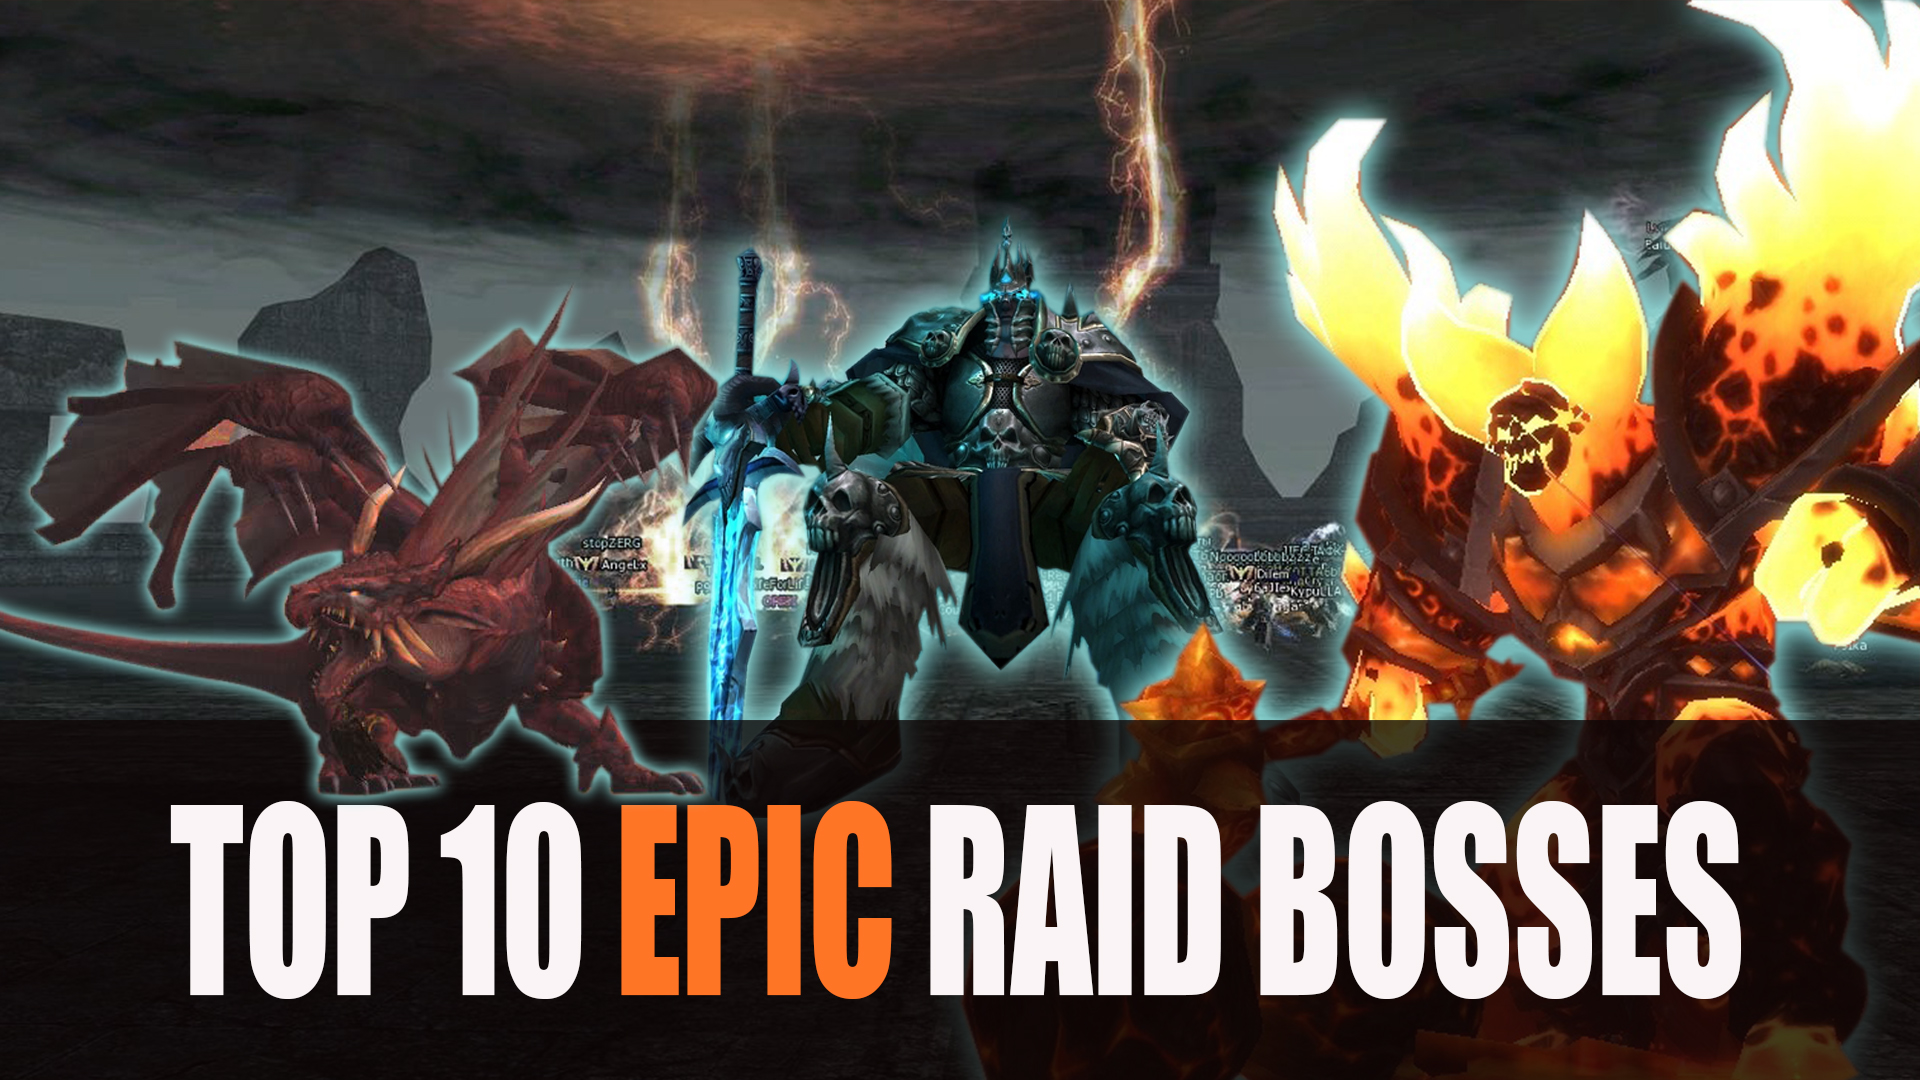 Top 10 Epic Raid Bosses in MMORPGs - Fextralife